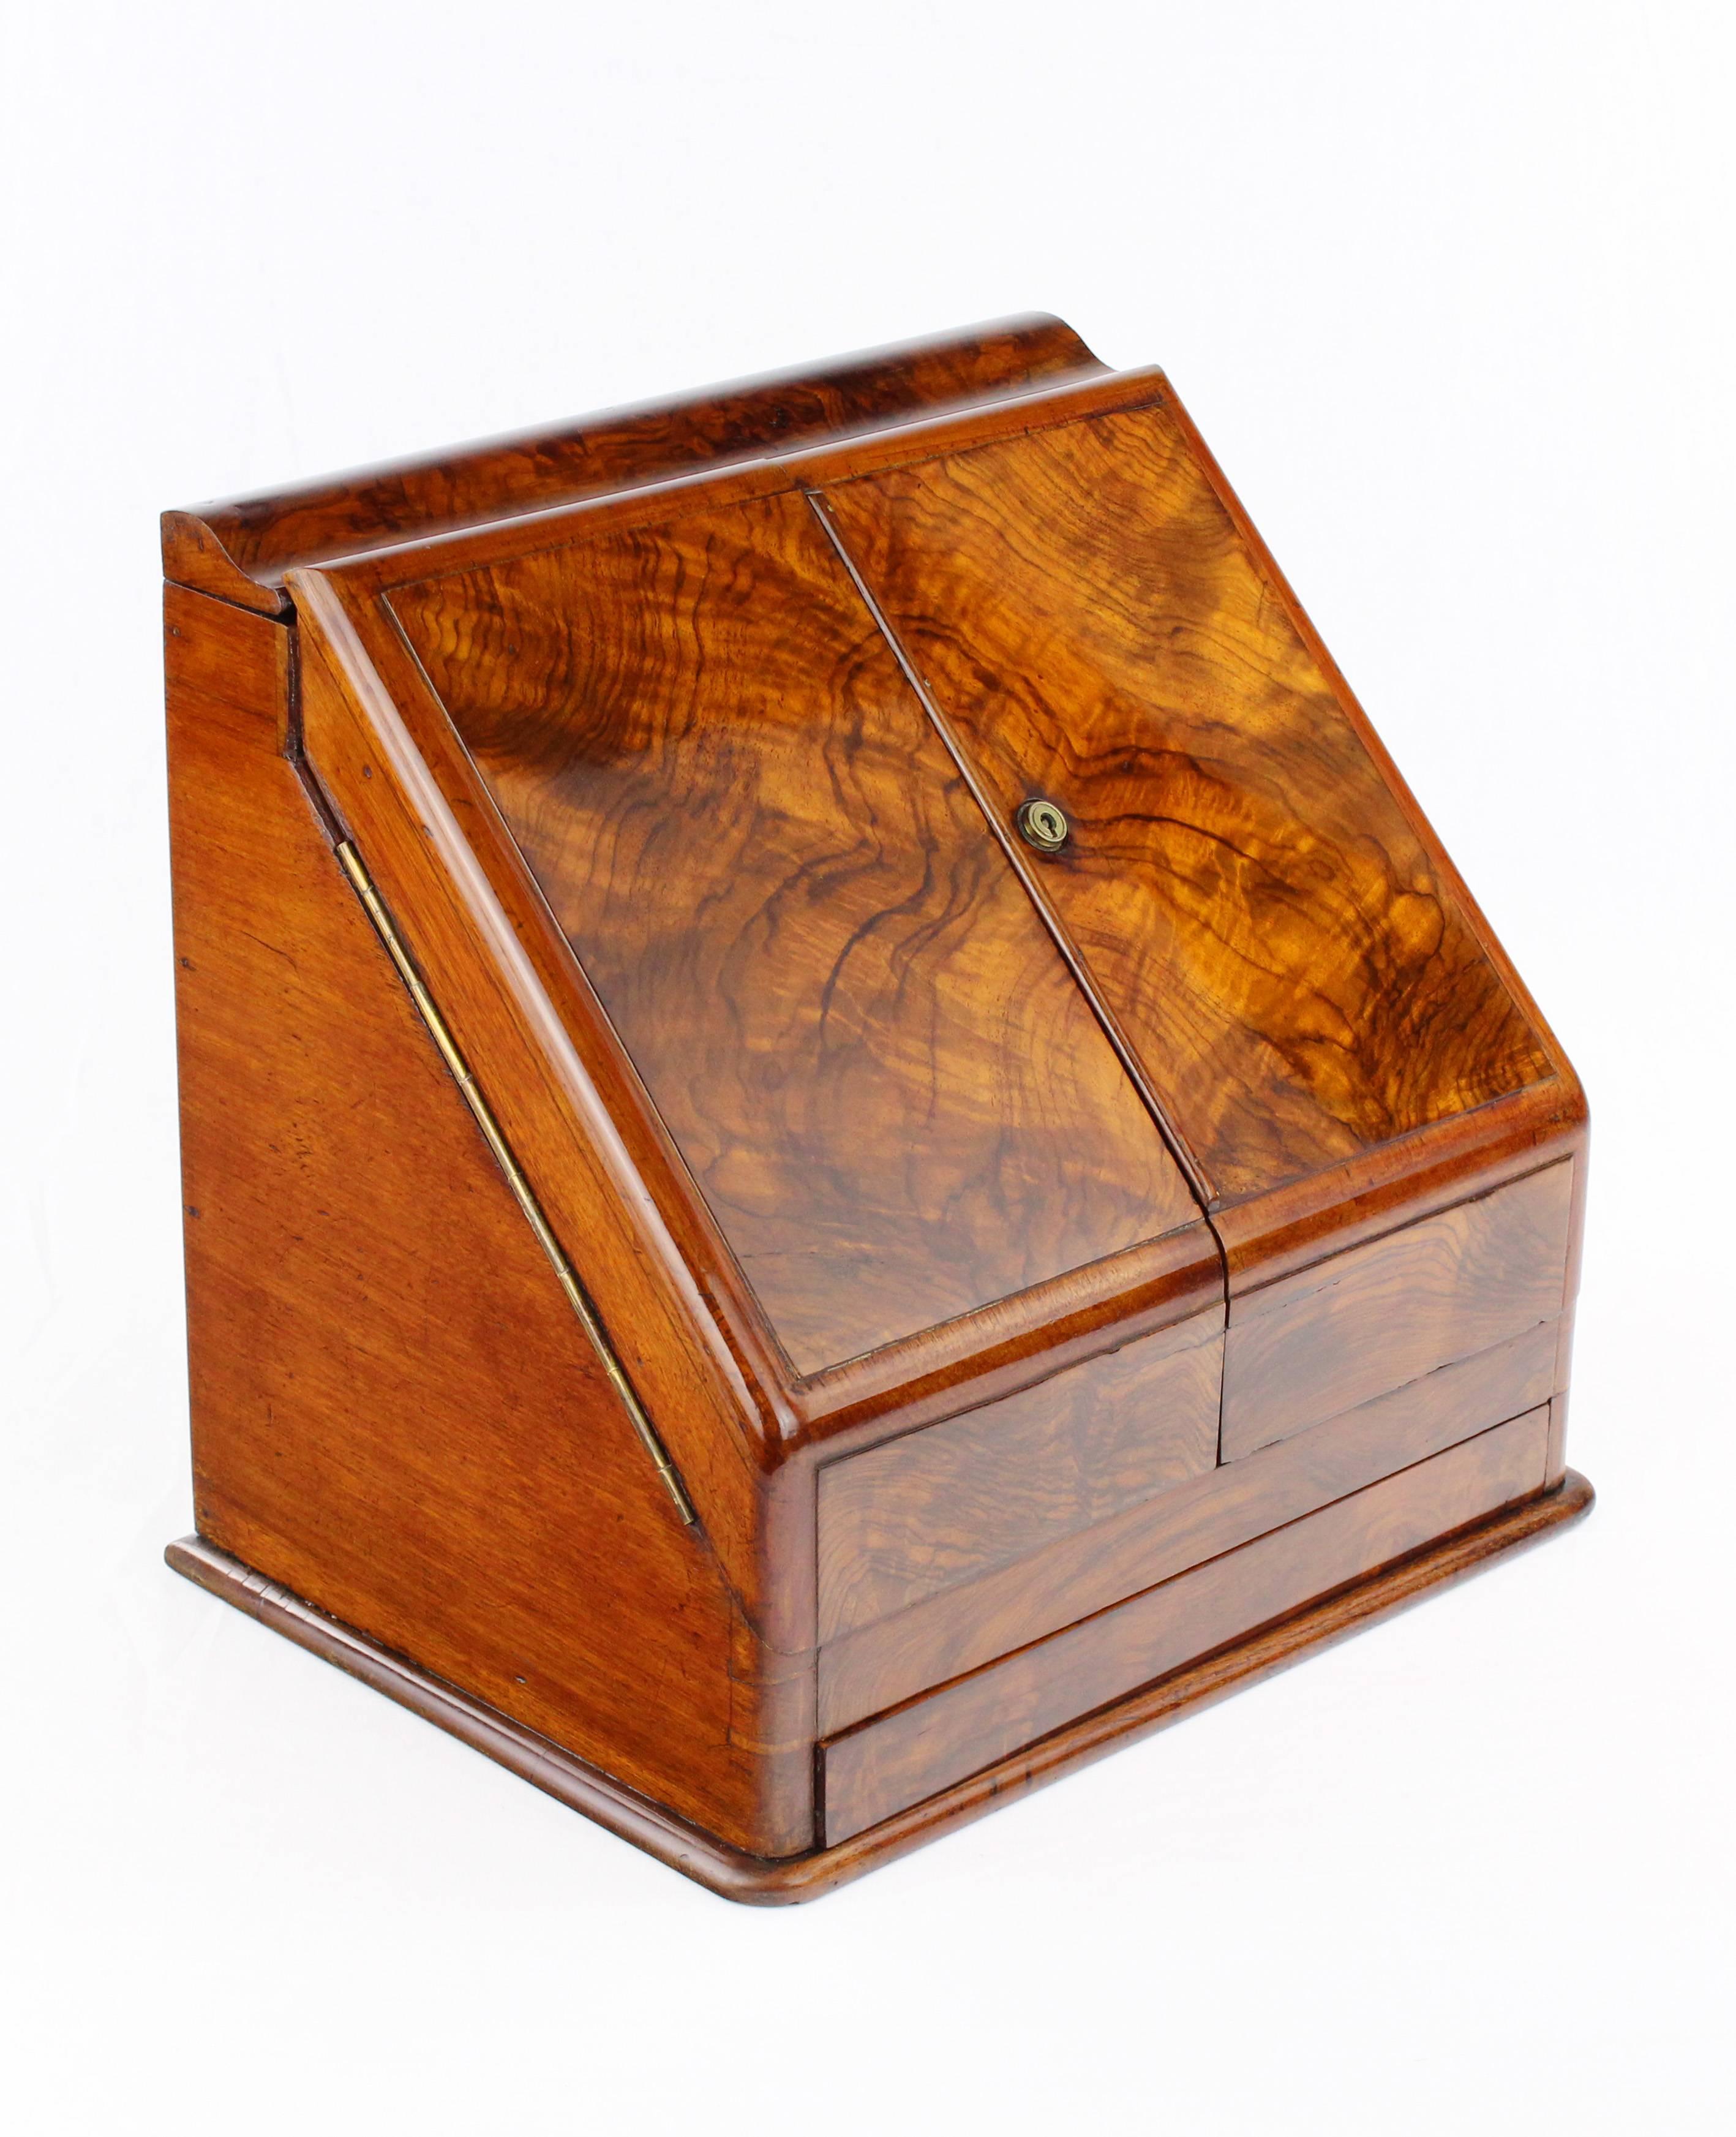 Writing display with date, 
England, circa 1880-1890
Walnut-tree
Openable, nice division with pigeonholes
Ink kegs
Secret compartments and separate small box for stamps
French shellac hand polish
Measures: Height: 32 cm, width: 33 cm, depth: